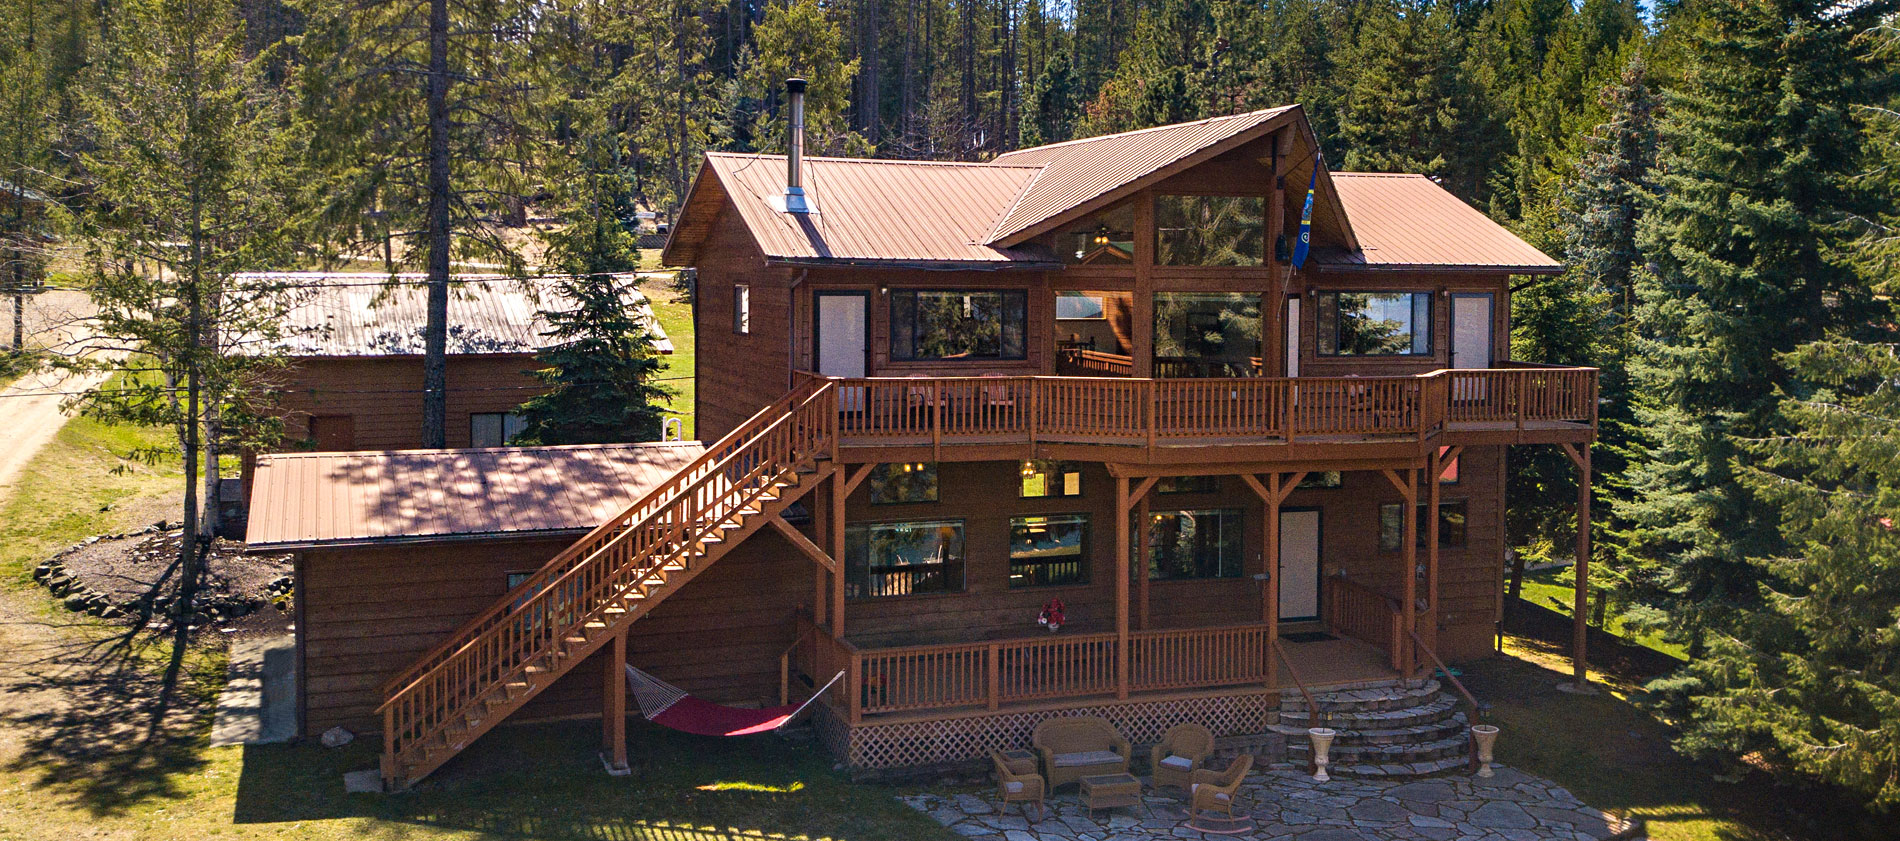 LAKEFRONT/VIEW HOME ON 1.02ACRE W/95FF OF DEEP WATER ON THE PRISTINE SHORES OF LAKE PEND OREILLE